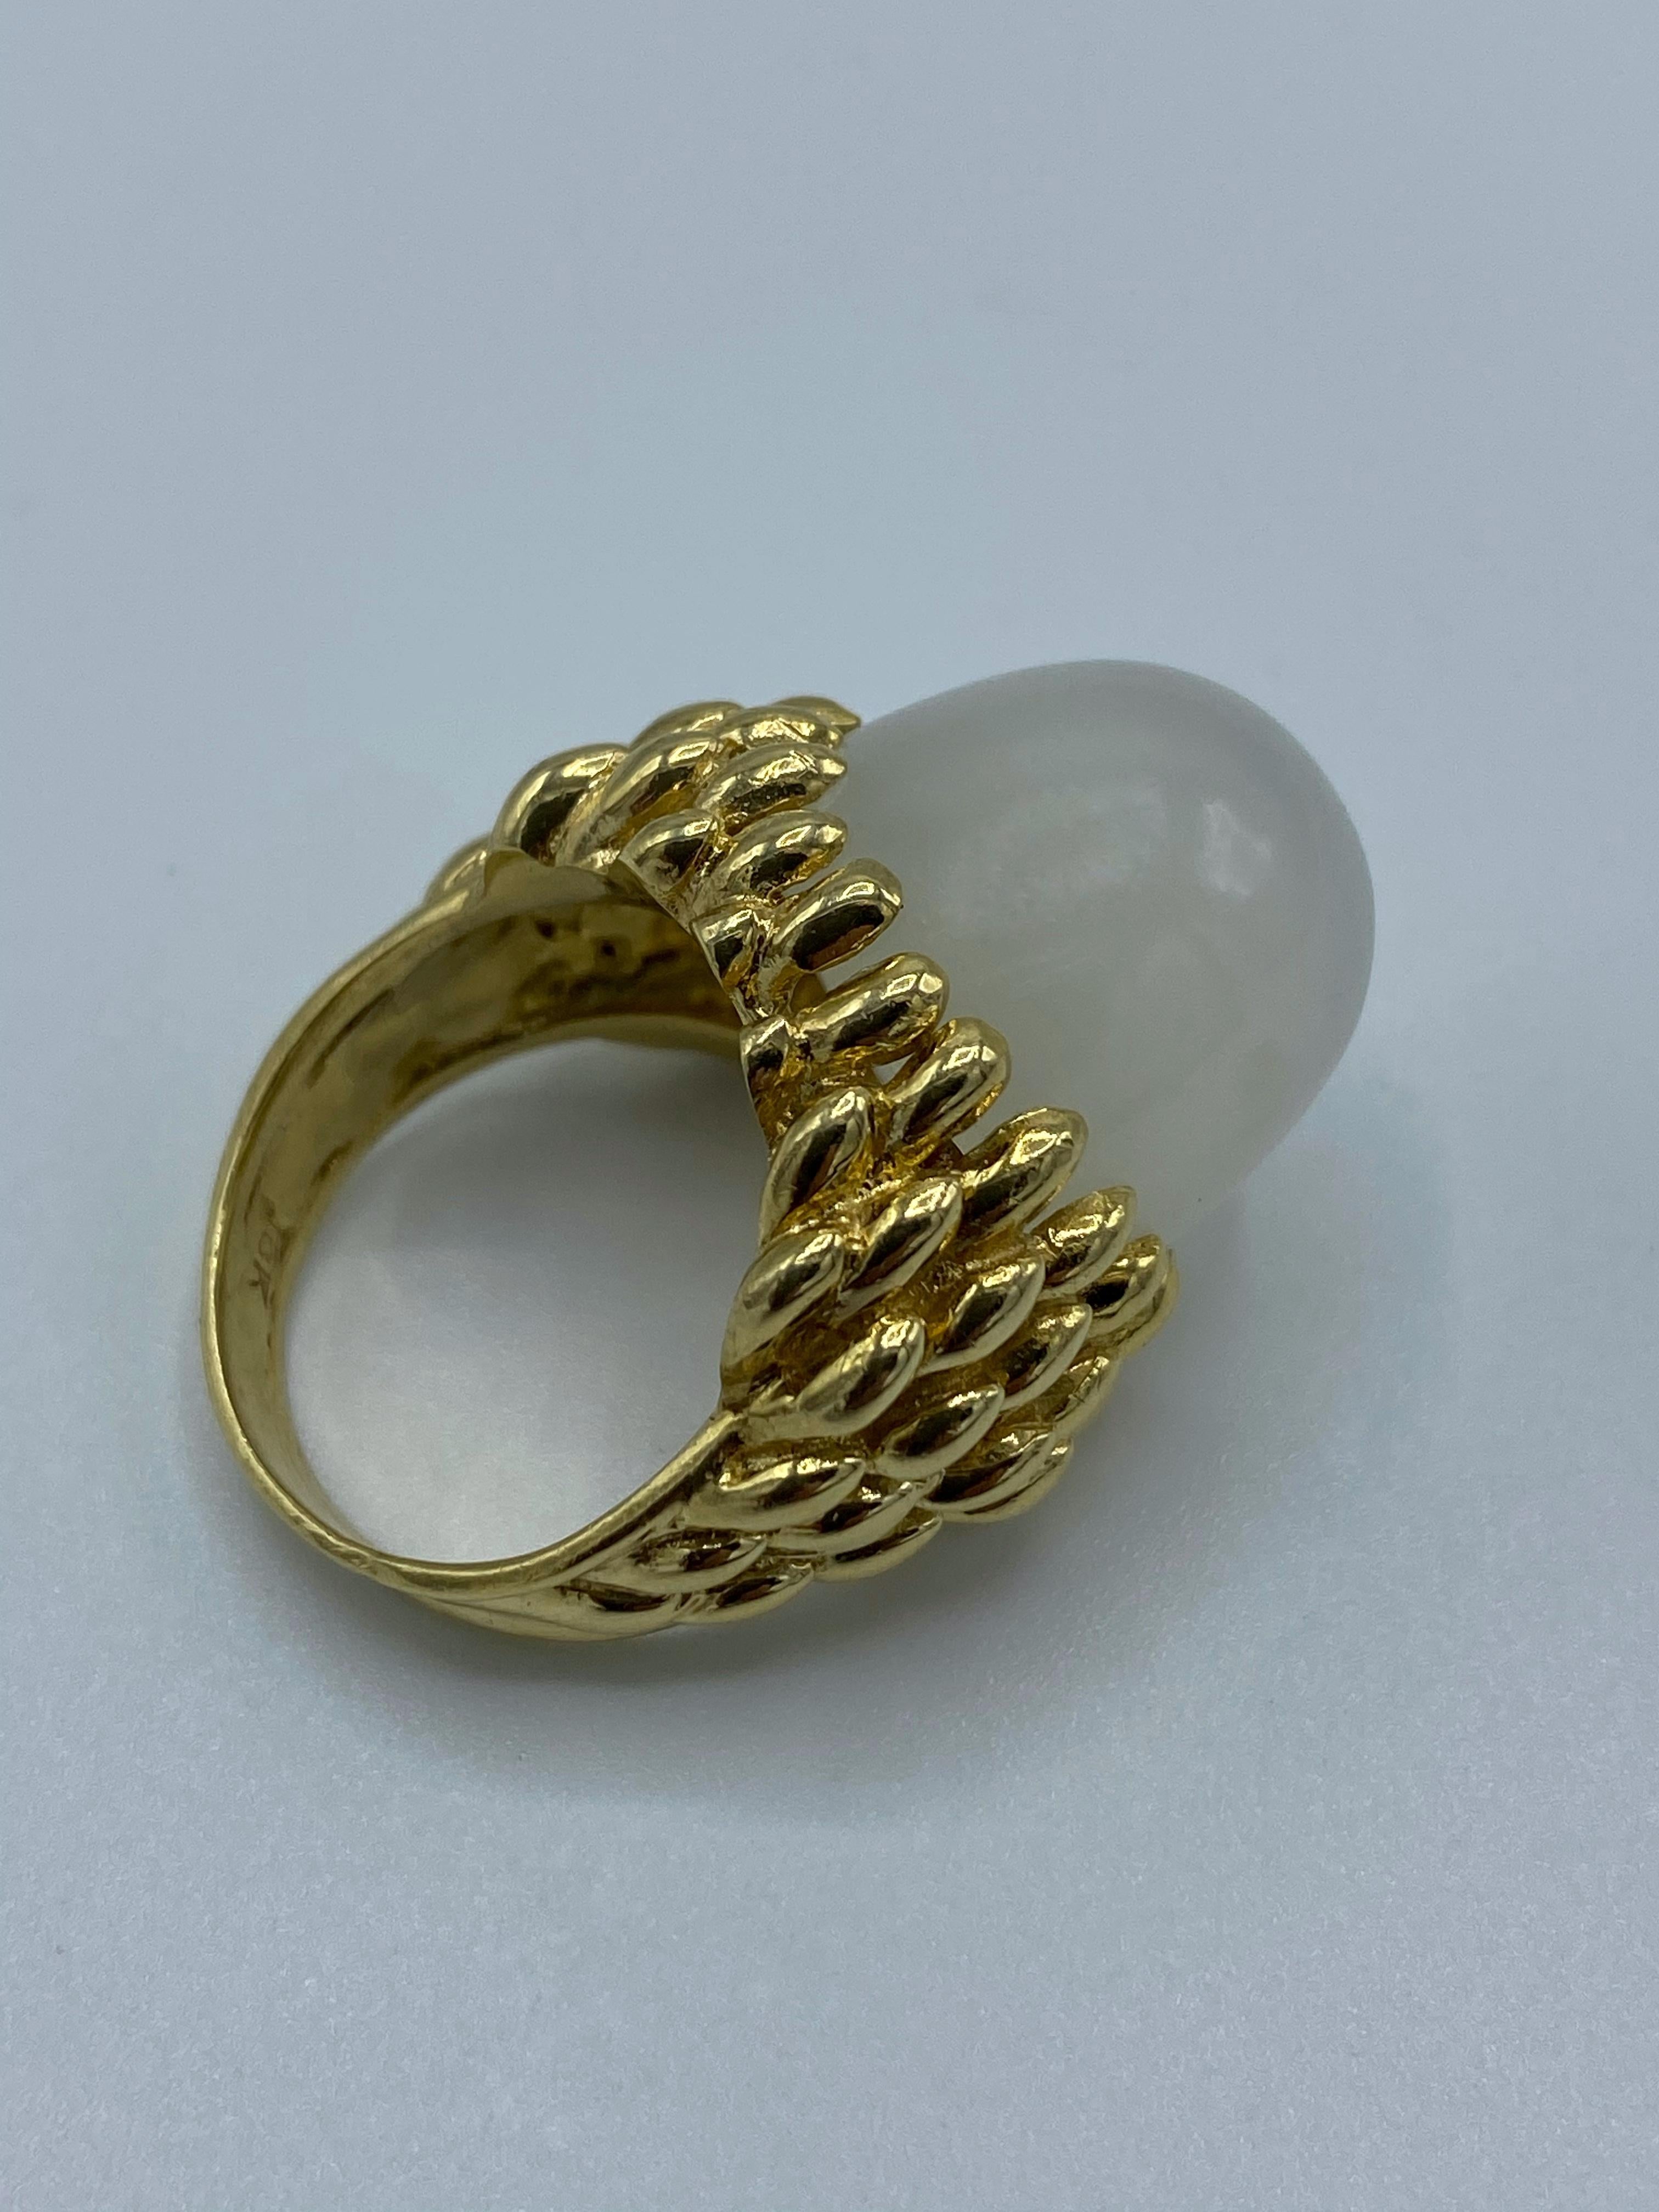 Product details:

The ring is made out of 18 karst yellow gold and moonstone.

Measurements: 1